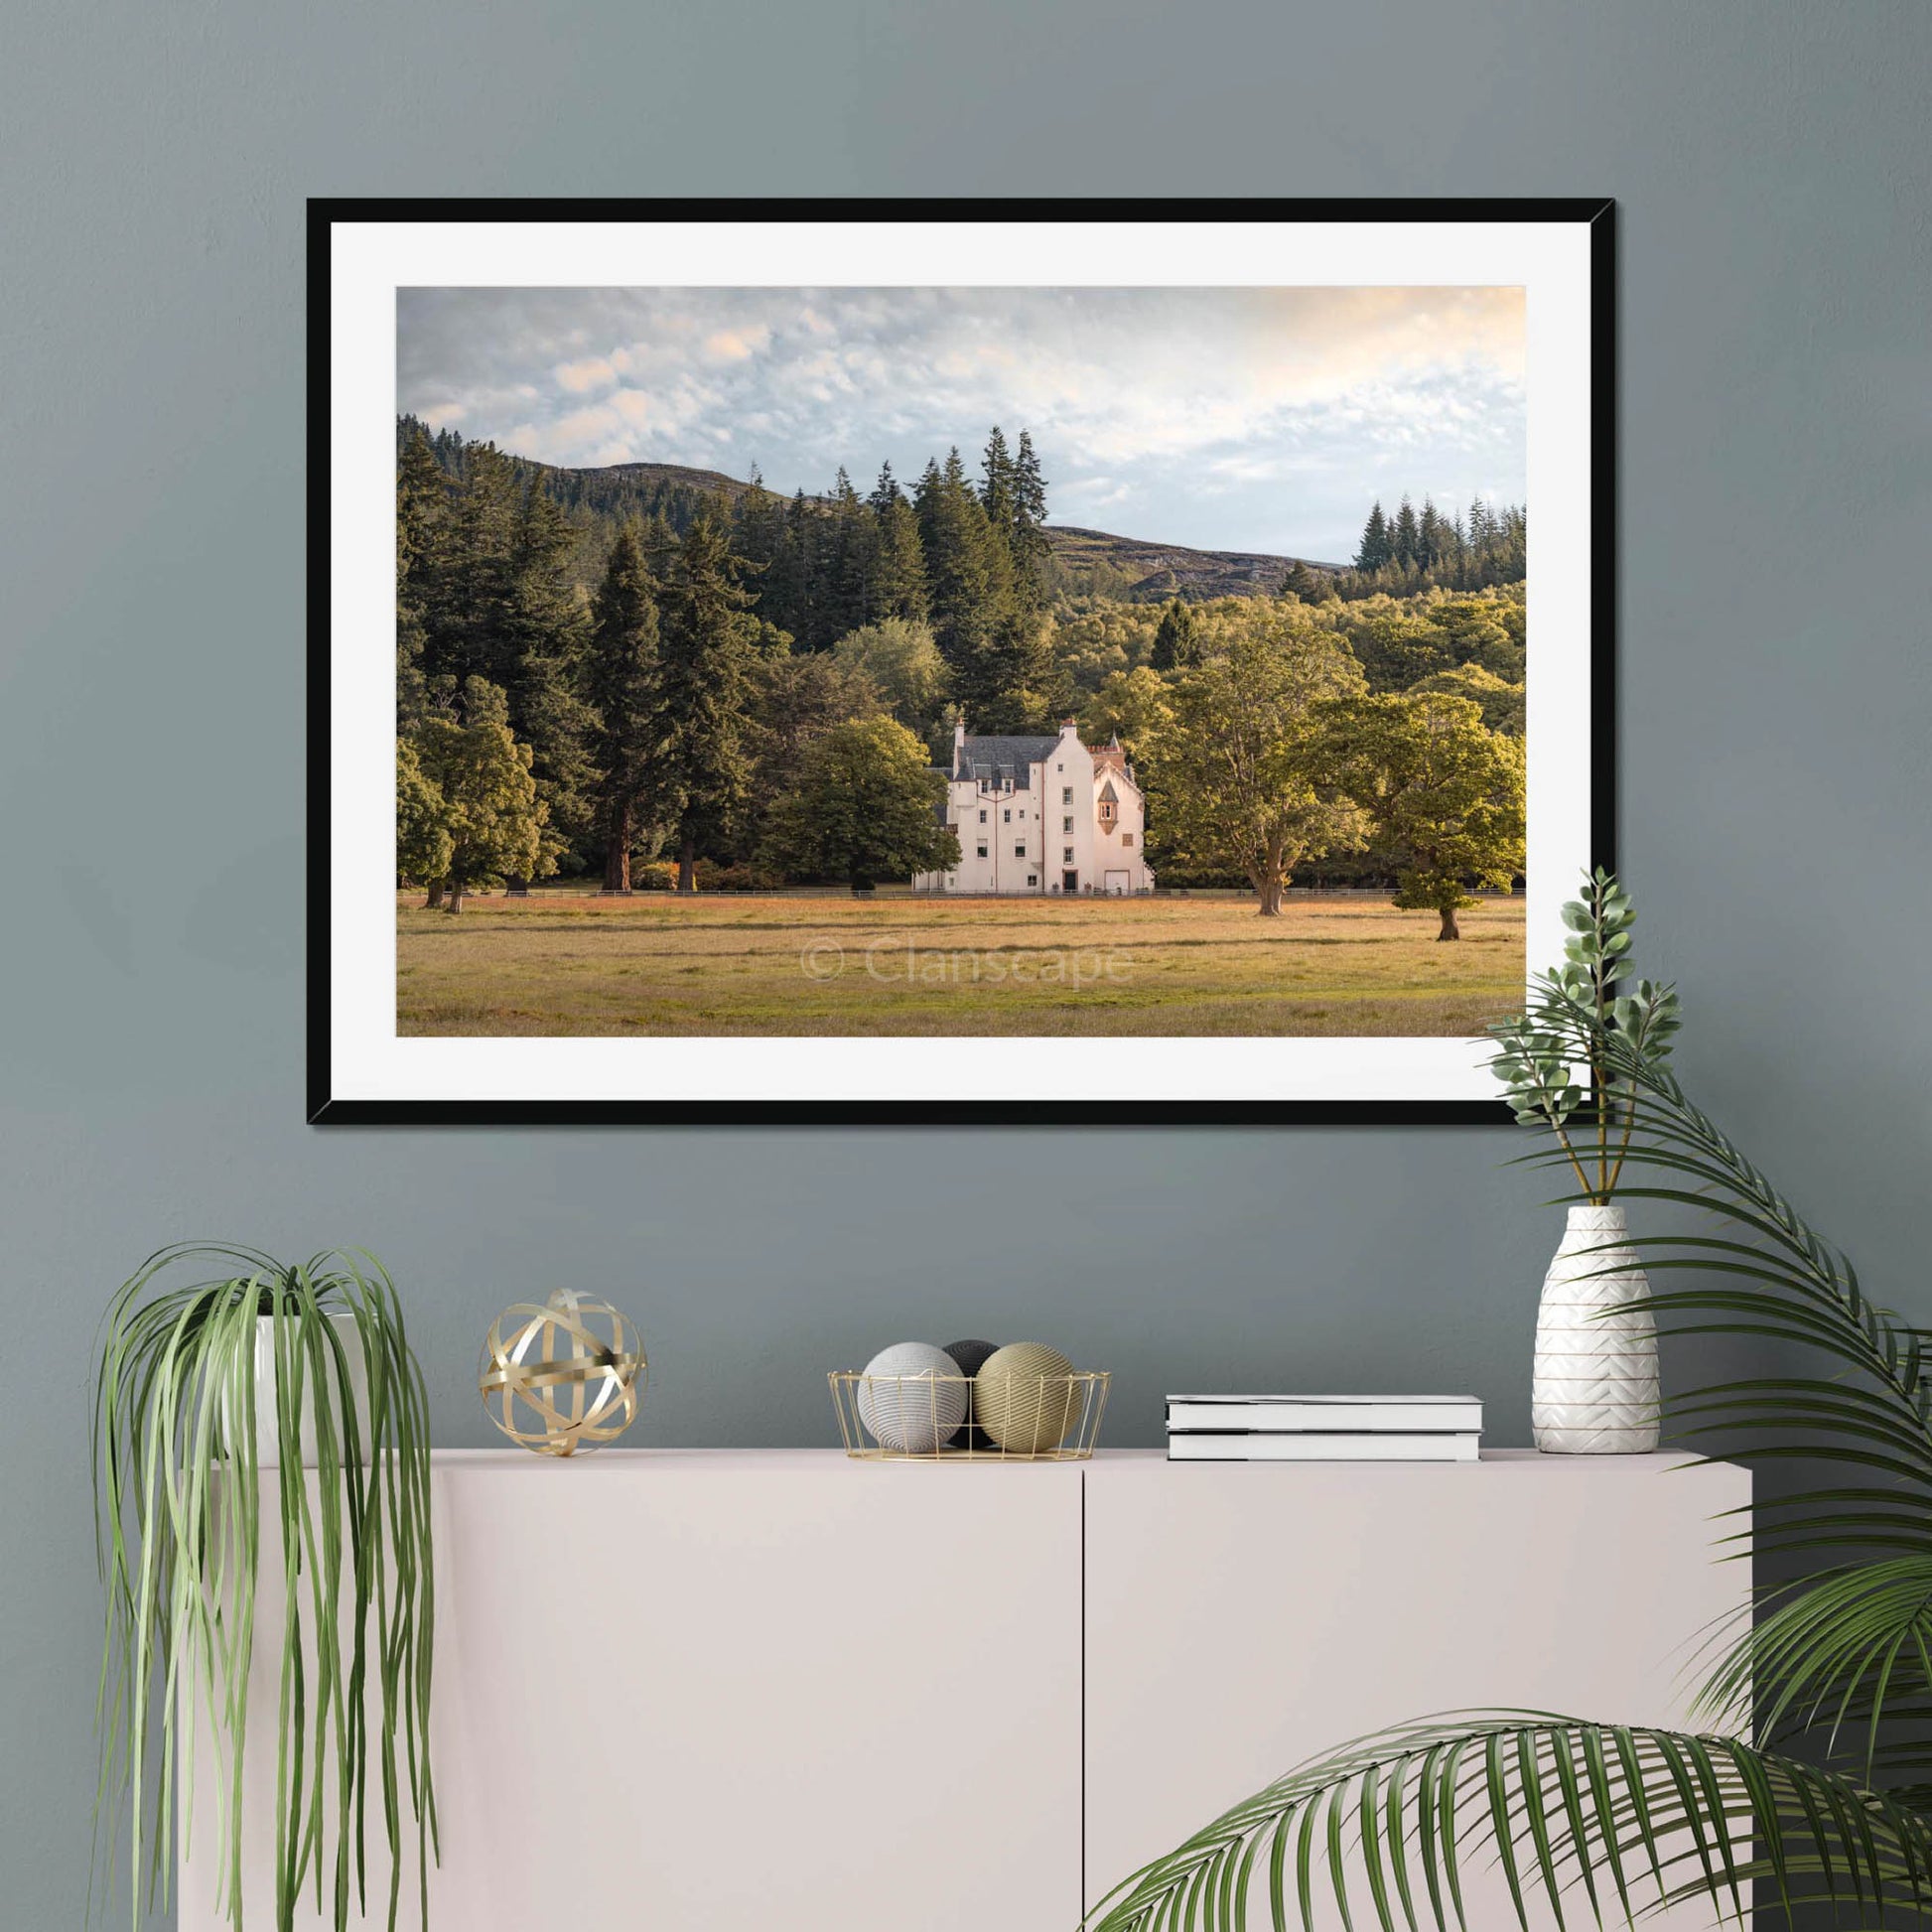 Clan Chisholm - Erchless Castle - Framed & Mounted Photo Print